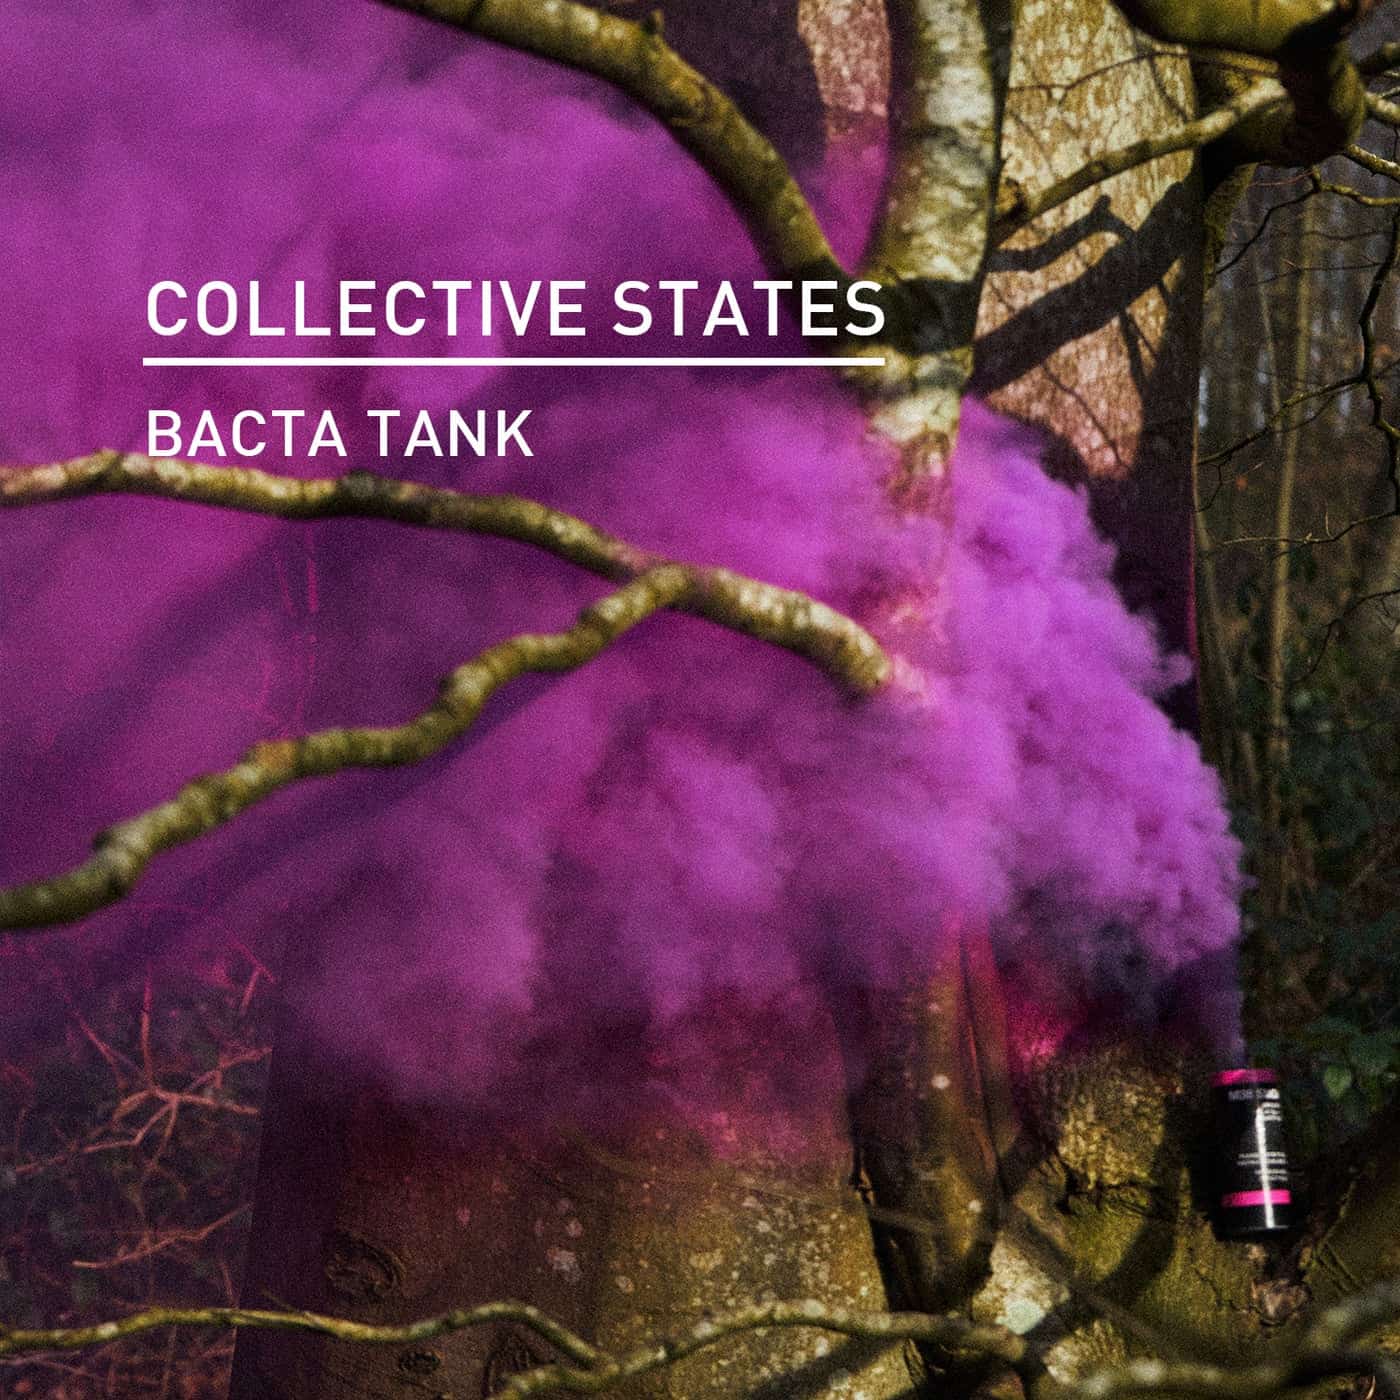 Download Collective States - Bacta Tank on Electrobuzz